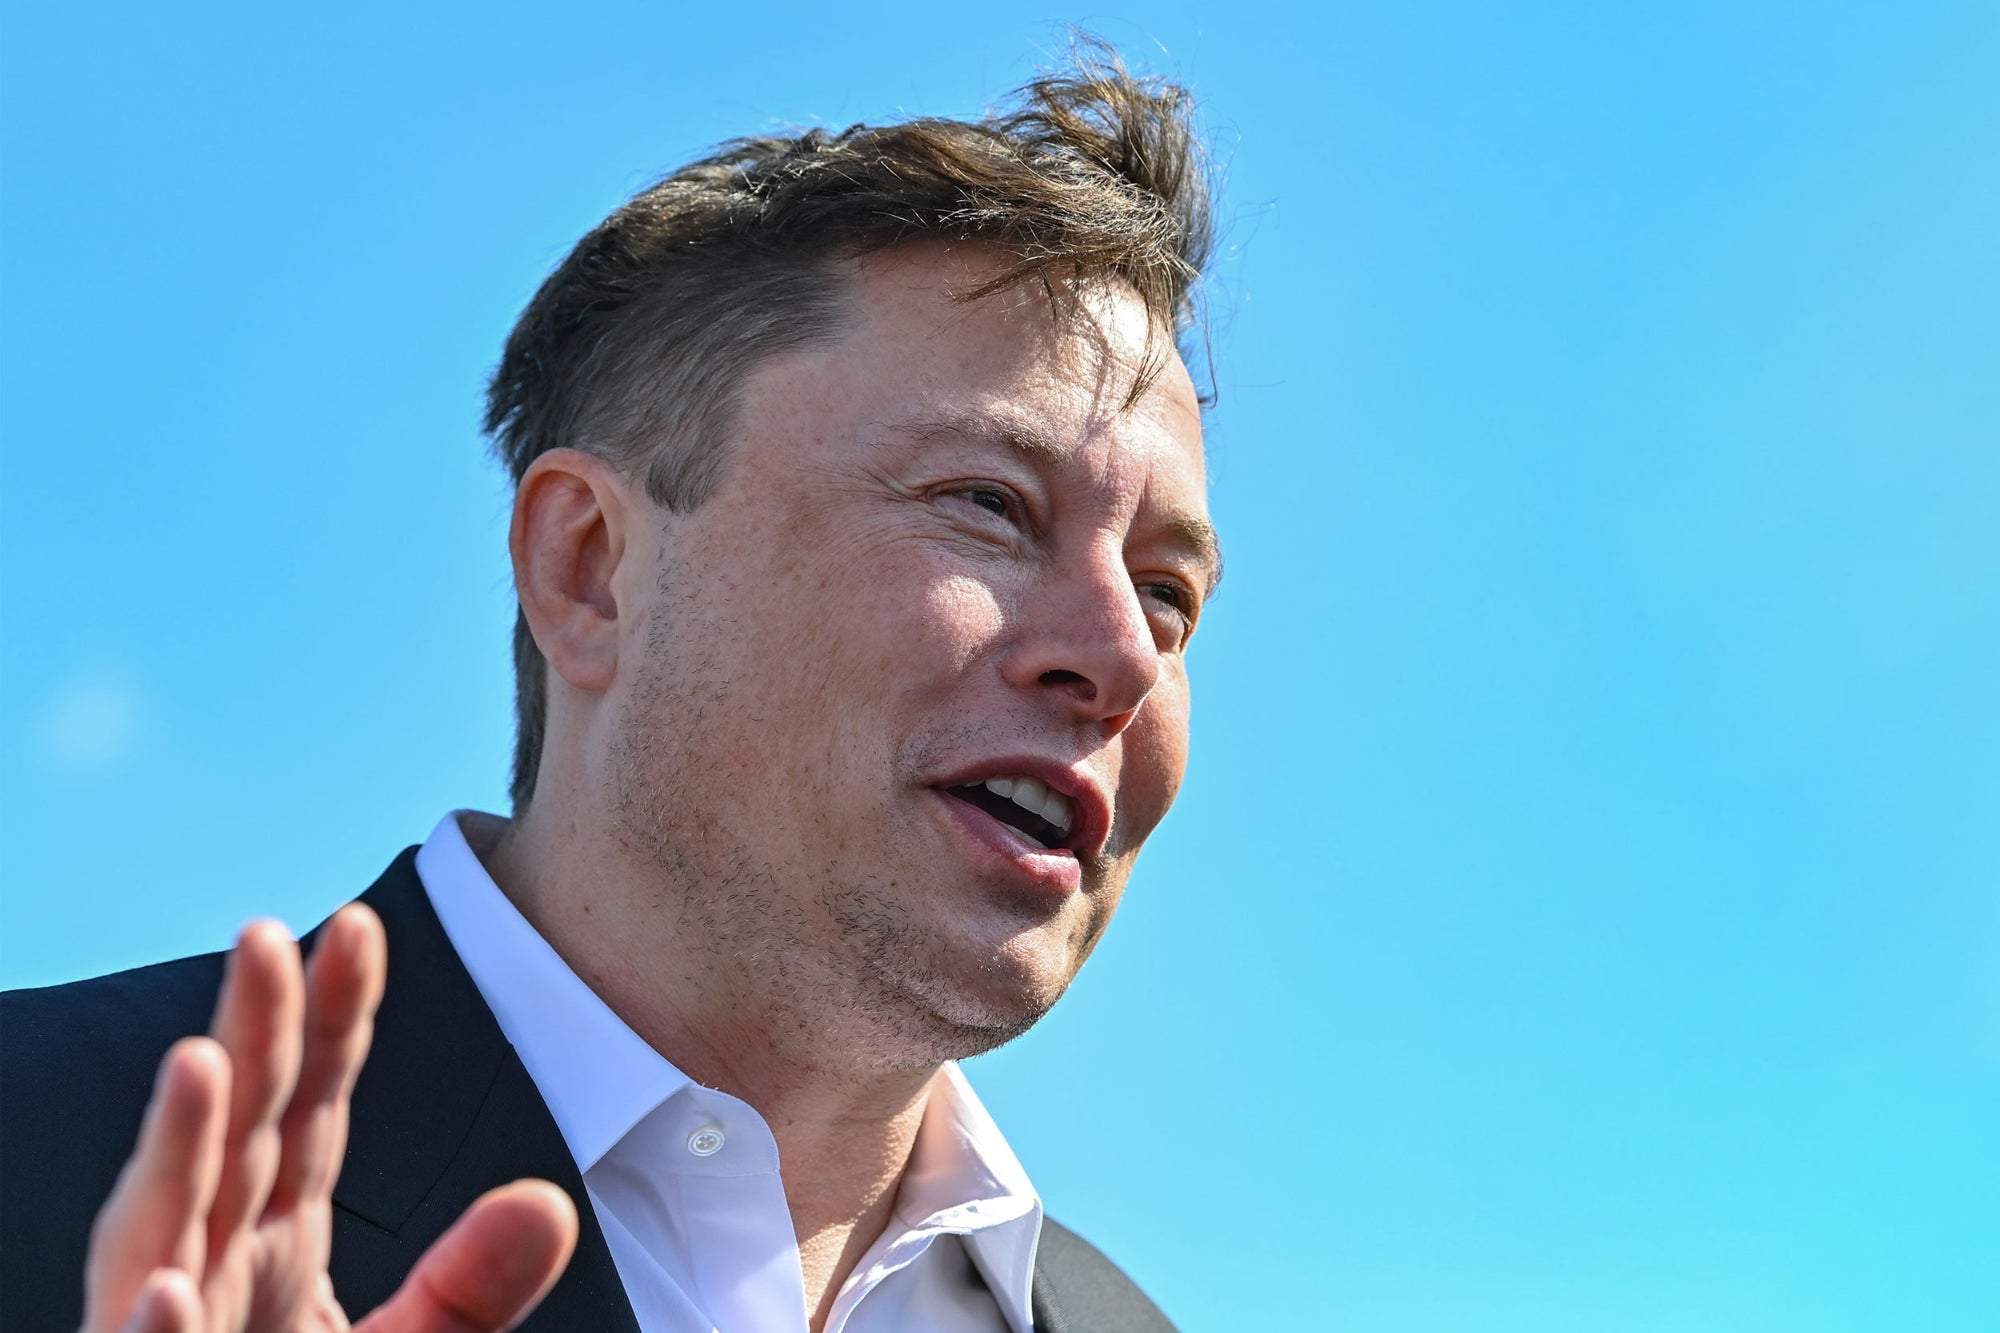 Steal These Business Superpowers From Elon Musk and Jeff Bezos